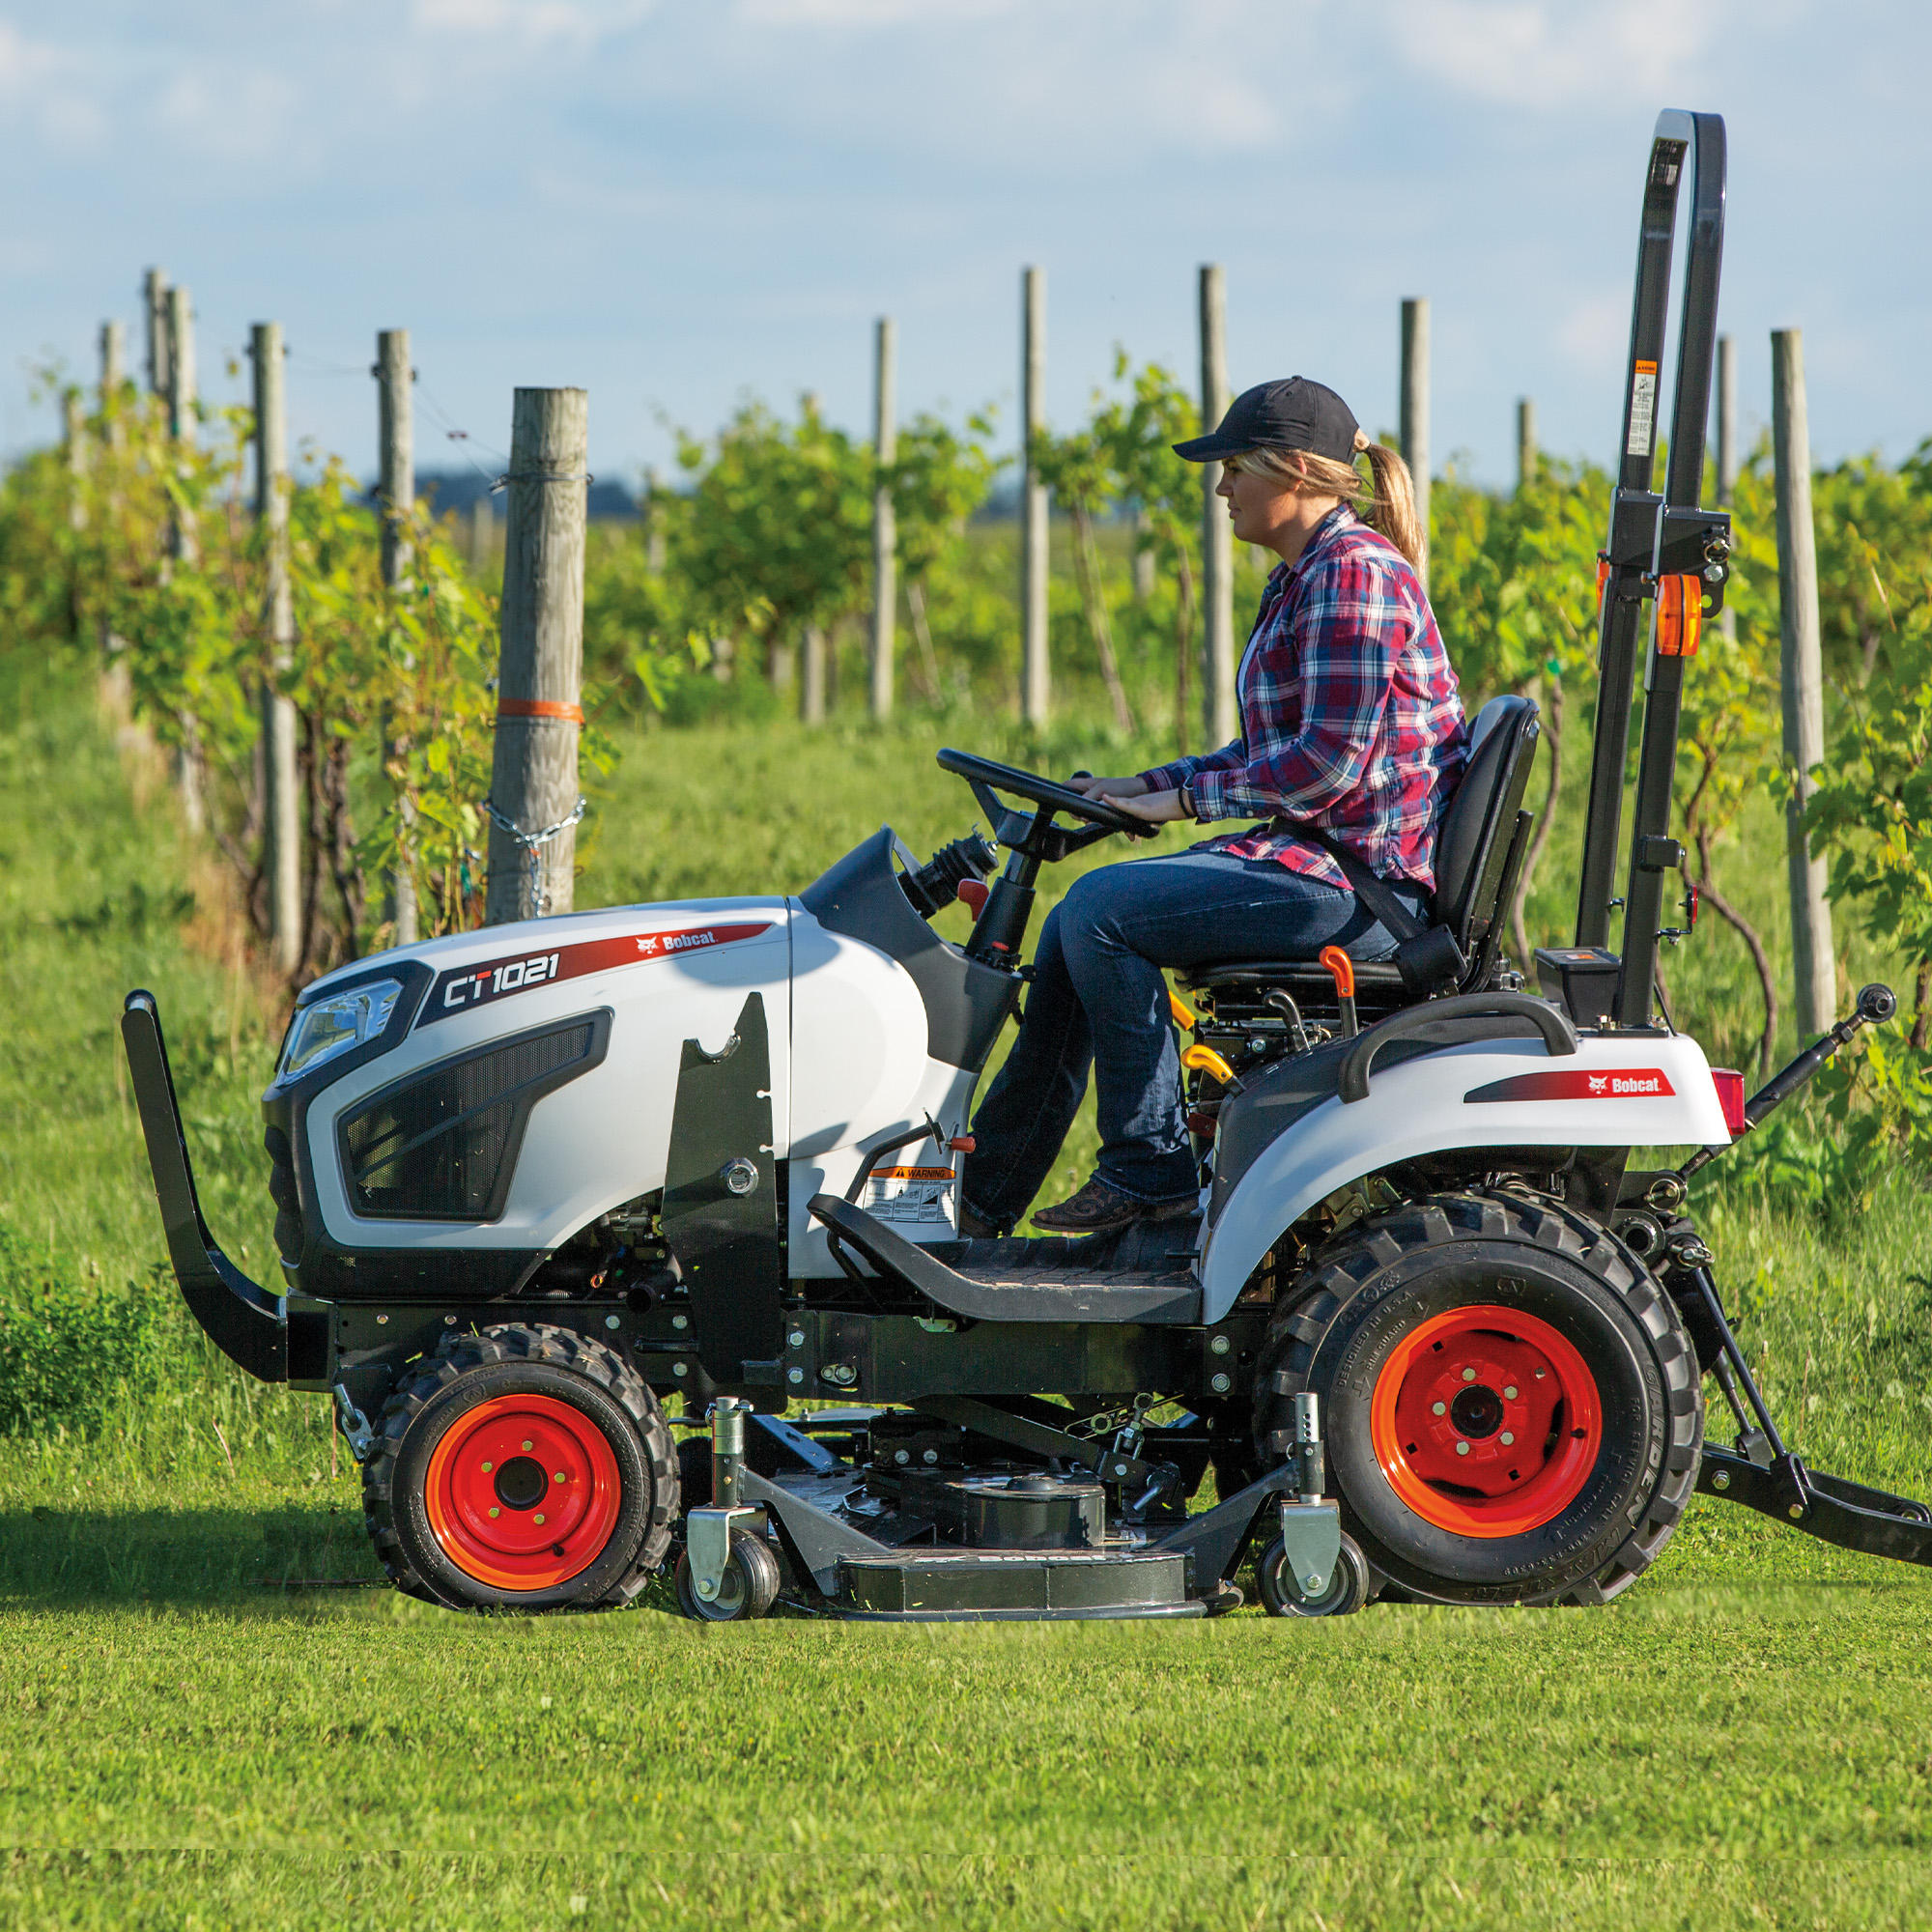 Bobcat CT1021 sub-compact tractor with mid-mount mower Bobcat of Whitehorse Whitehorse (867)633-4426